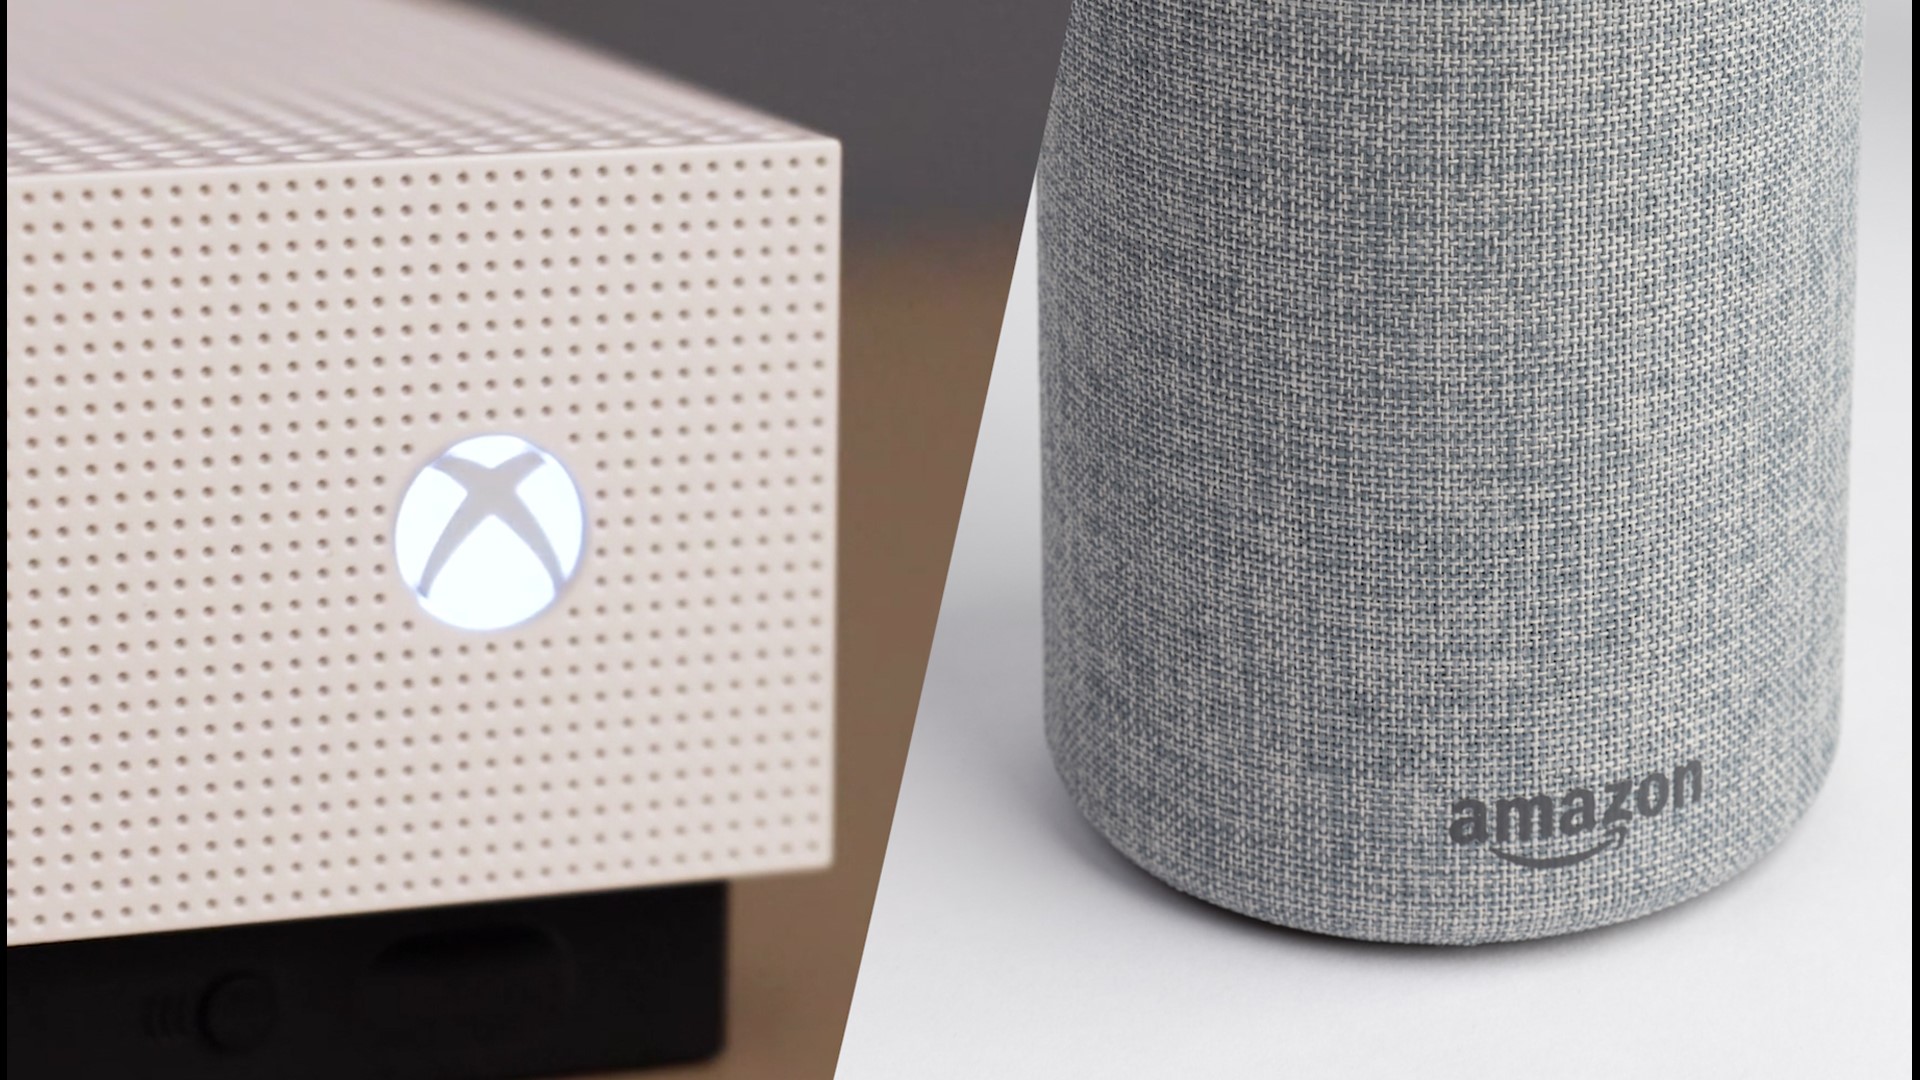 Xbox Game Pass subscribers in the U.S. can now download games using Alexa commands thanks to a collaboration between Amazon and Microsoft. HitPoints' Johana Restrepo has more.